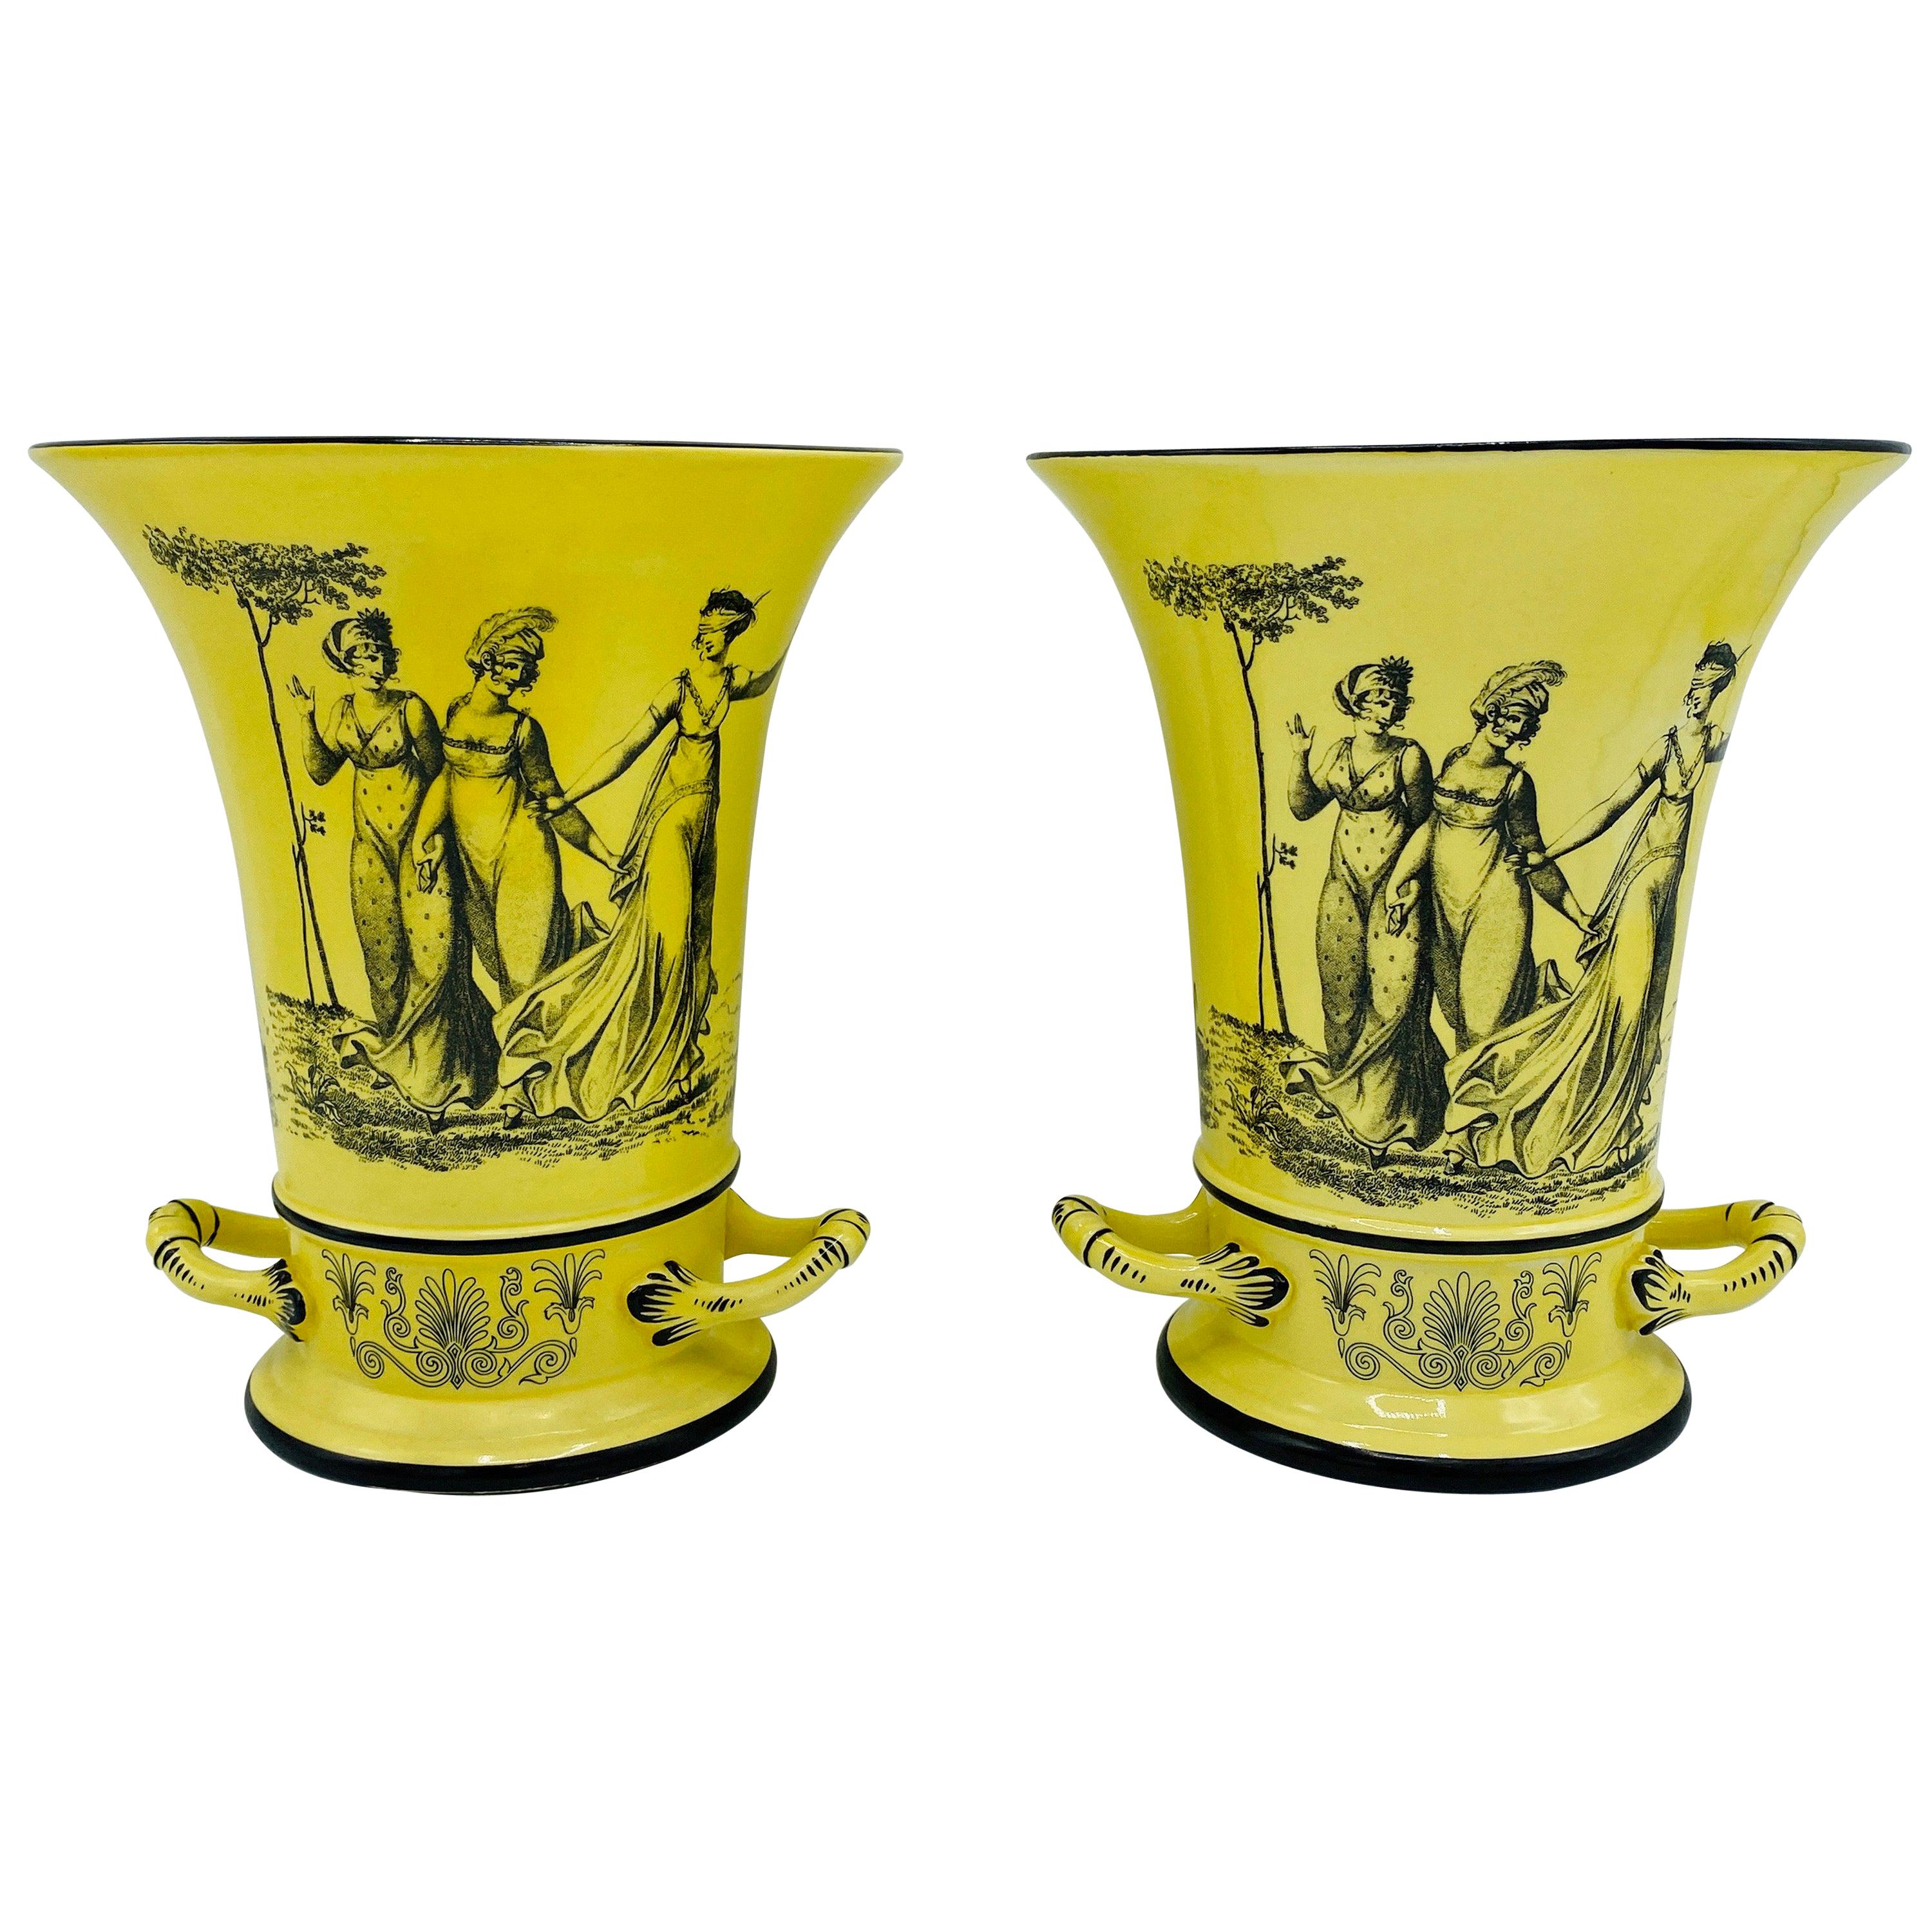 Italian Mottahedeh Yellow and Black Toile Handled Urn Vases, Pair, 1960s For Sale